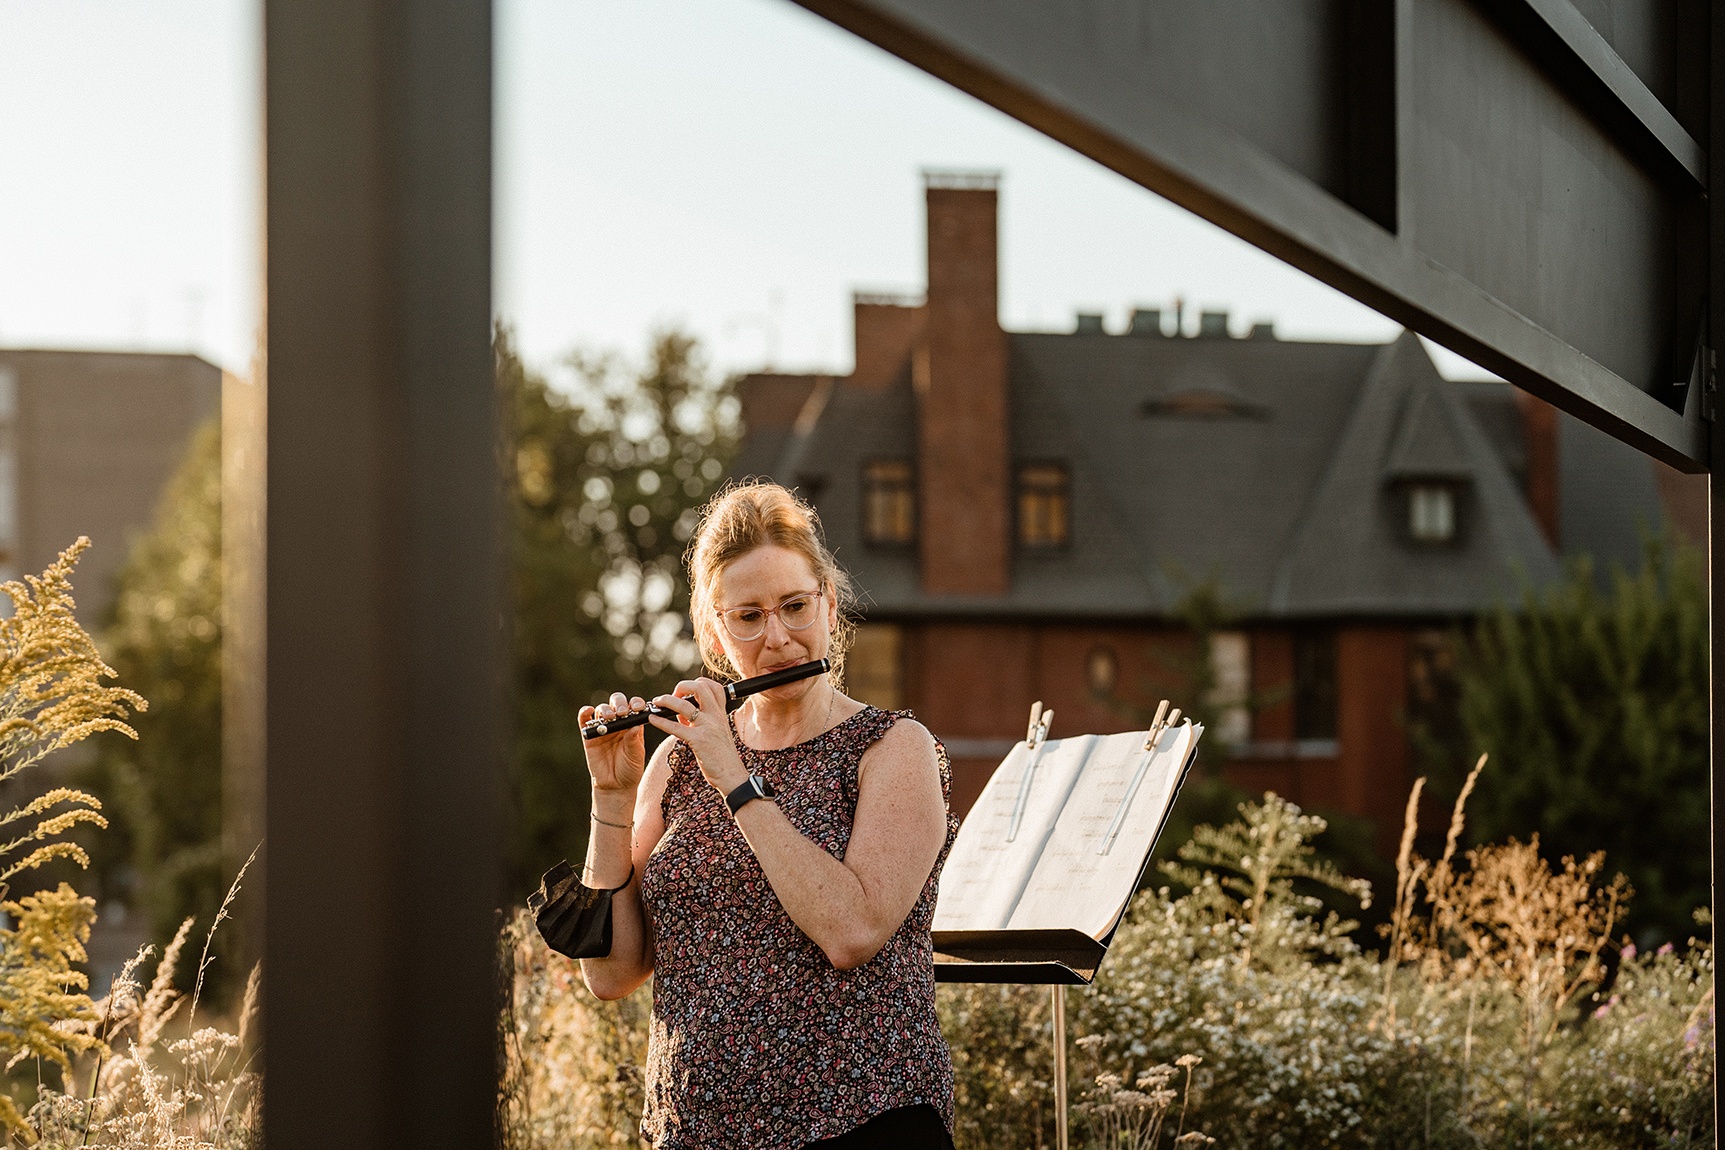 A St. Louis Symphony Orchestra musician performing outdoors in Park-Like